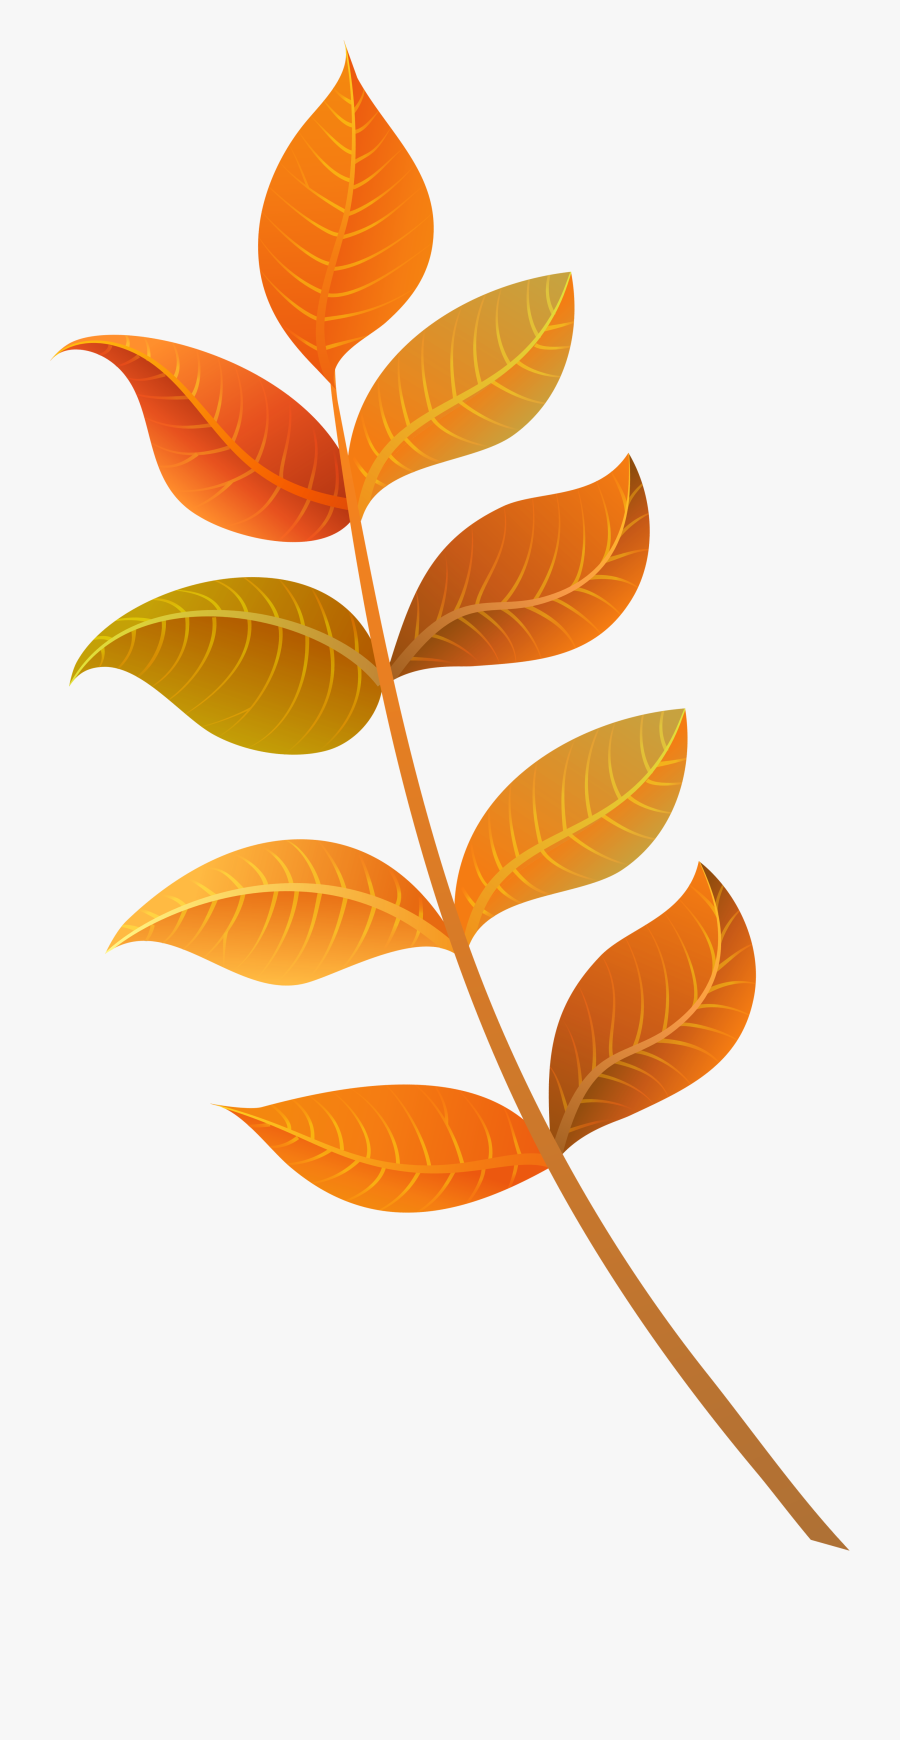 Fall Leaves Png Image - Good Morning My Girlfriend, Transparent Clipart